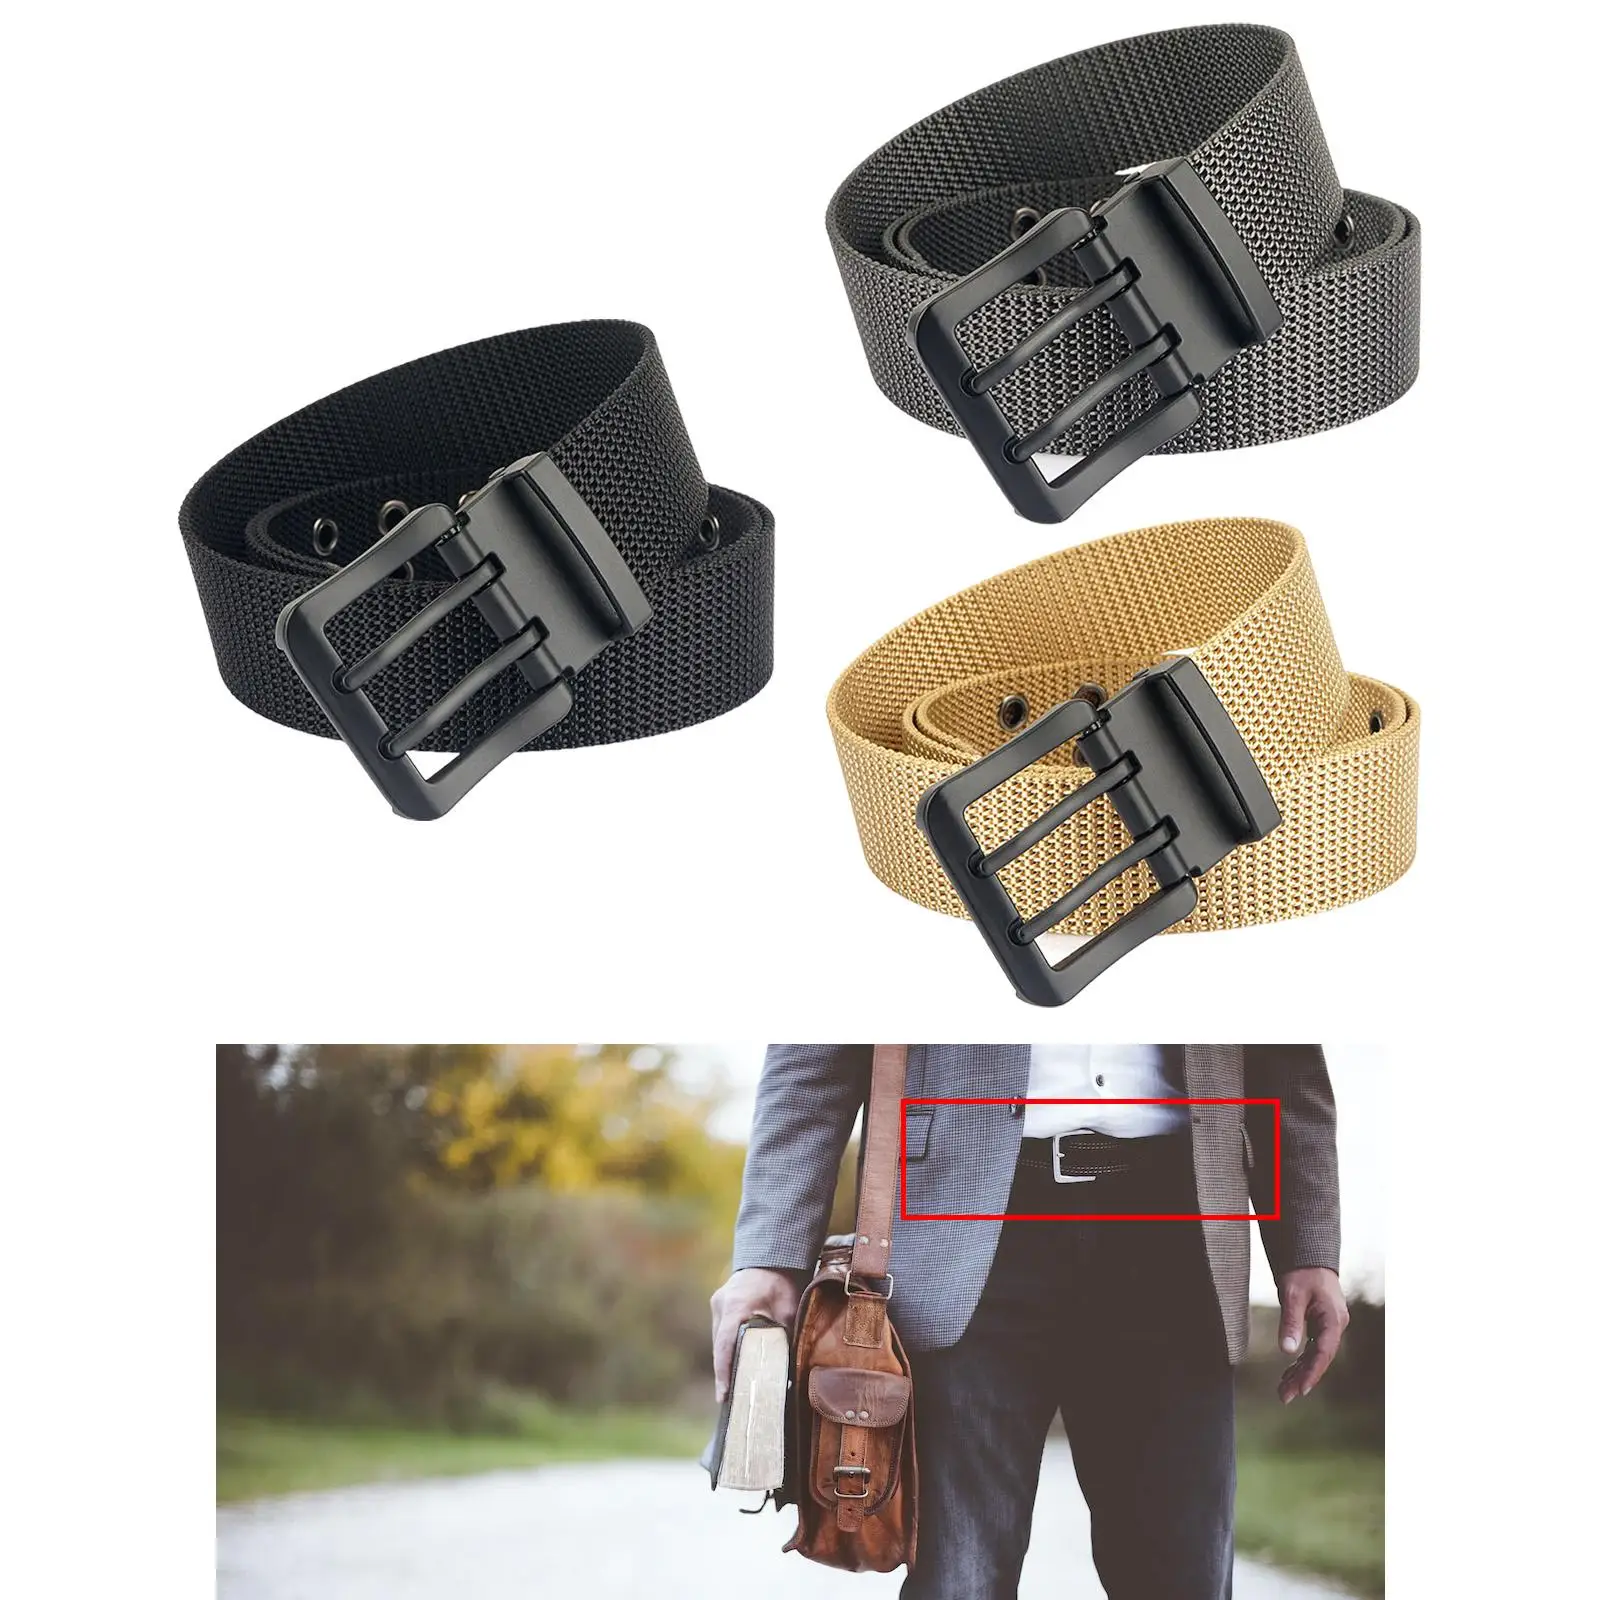 Durable Nylon Belt Waistband Adjustable Breathable Waist Belt Webbing Comfortable Men for Running Dancing Party Hunting Cosplay